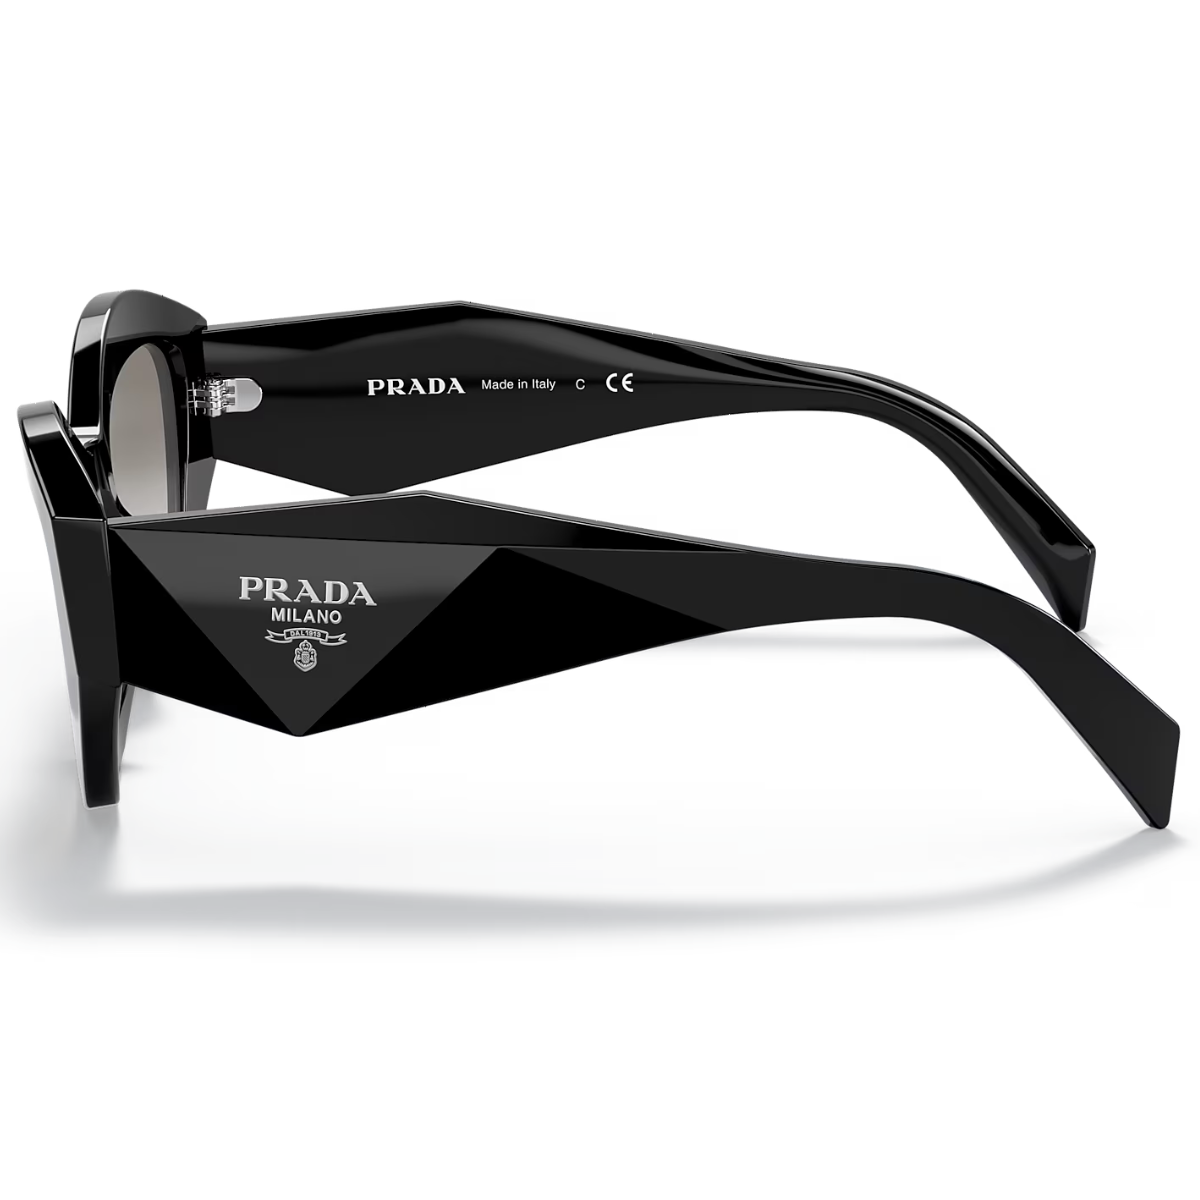 "Upgrade your eyewear collection with Prada SPR 07Y sunglasses, blending elegance and style for men and women at Optorium."